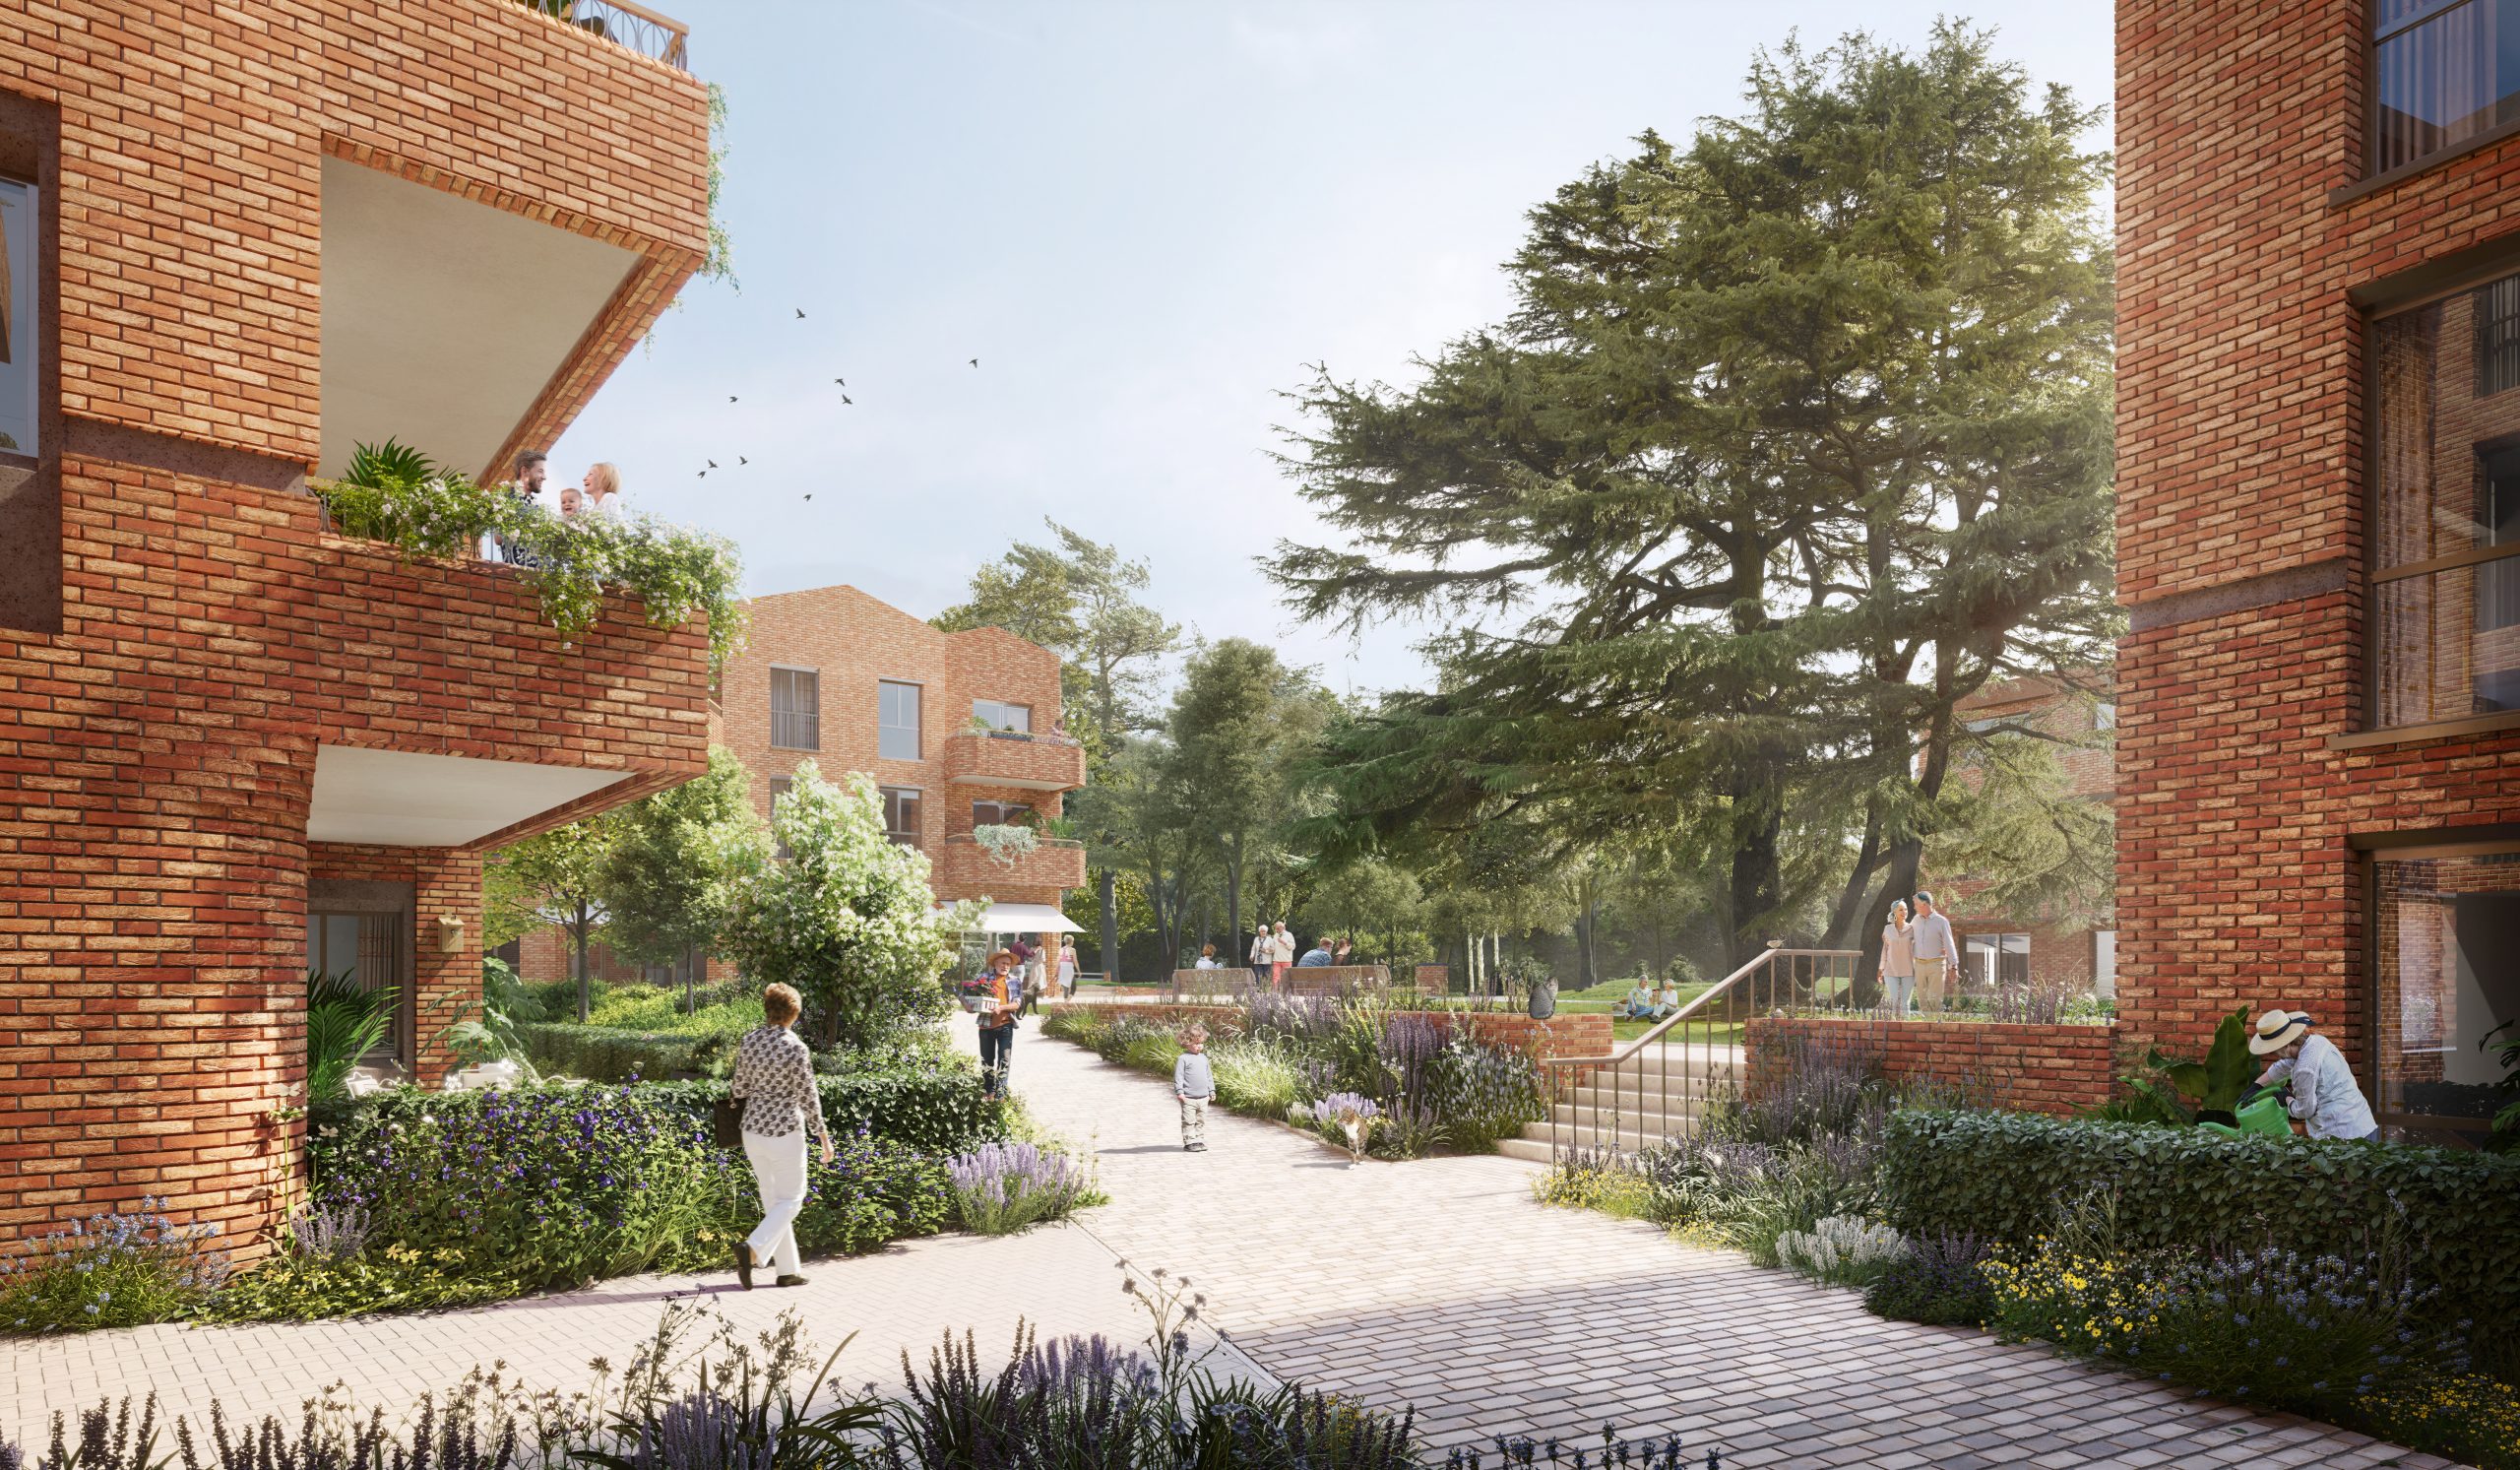 CGI of the proposed senior living homes and communal space